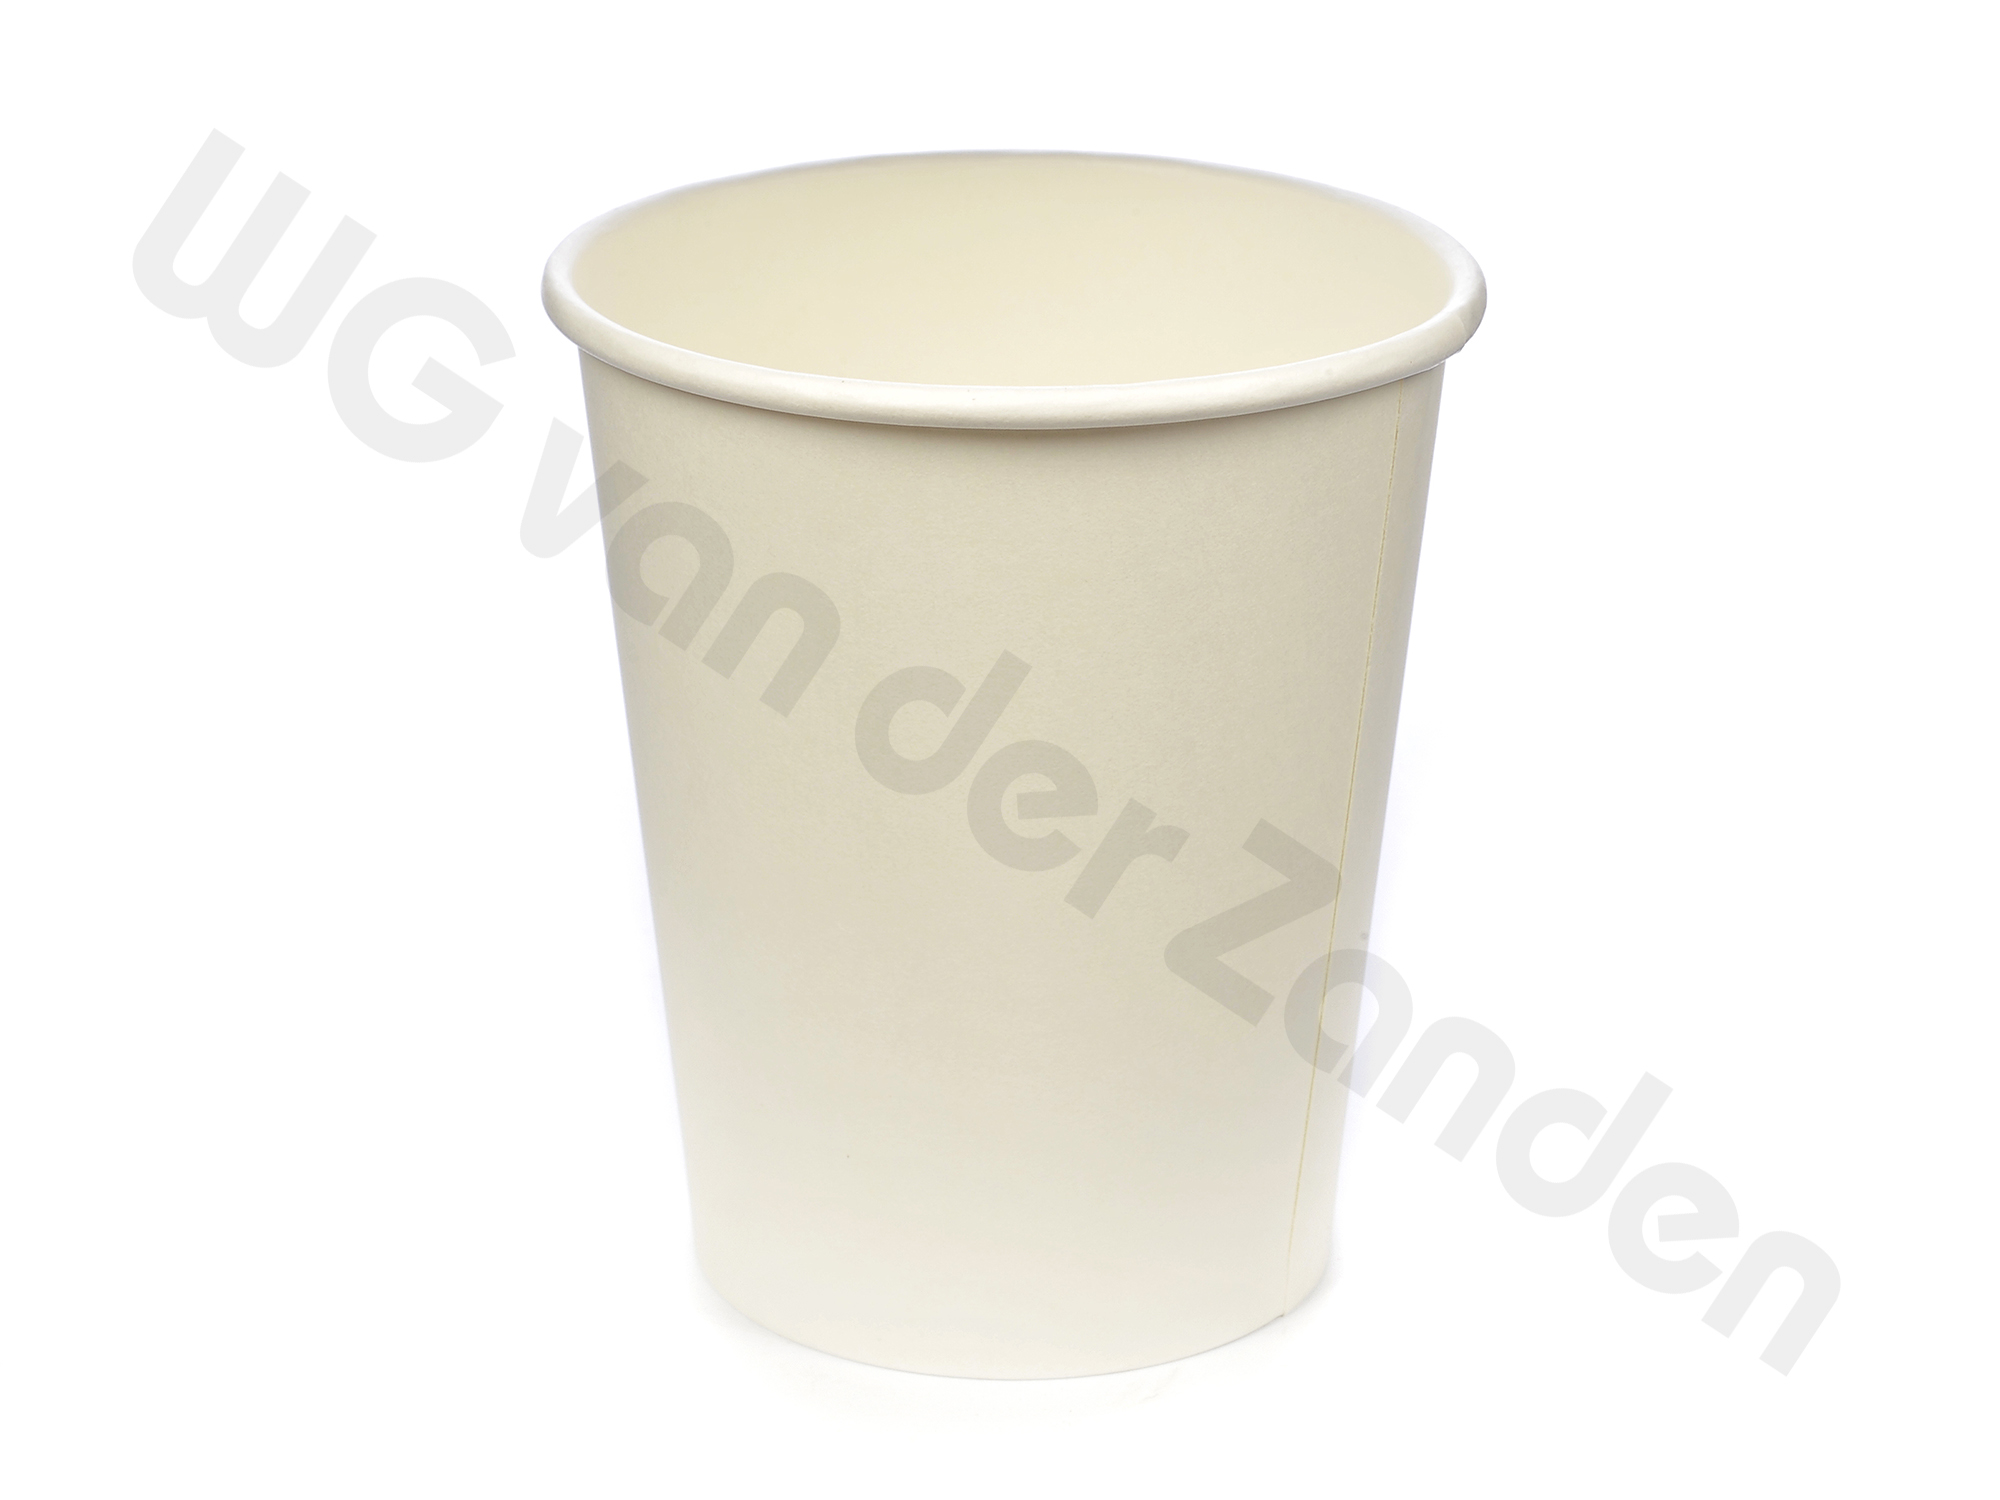 130088 CUPS DISPOSABLE PAPER COFFEE TO GO 16OZ